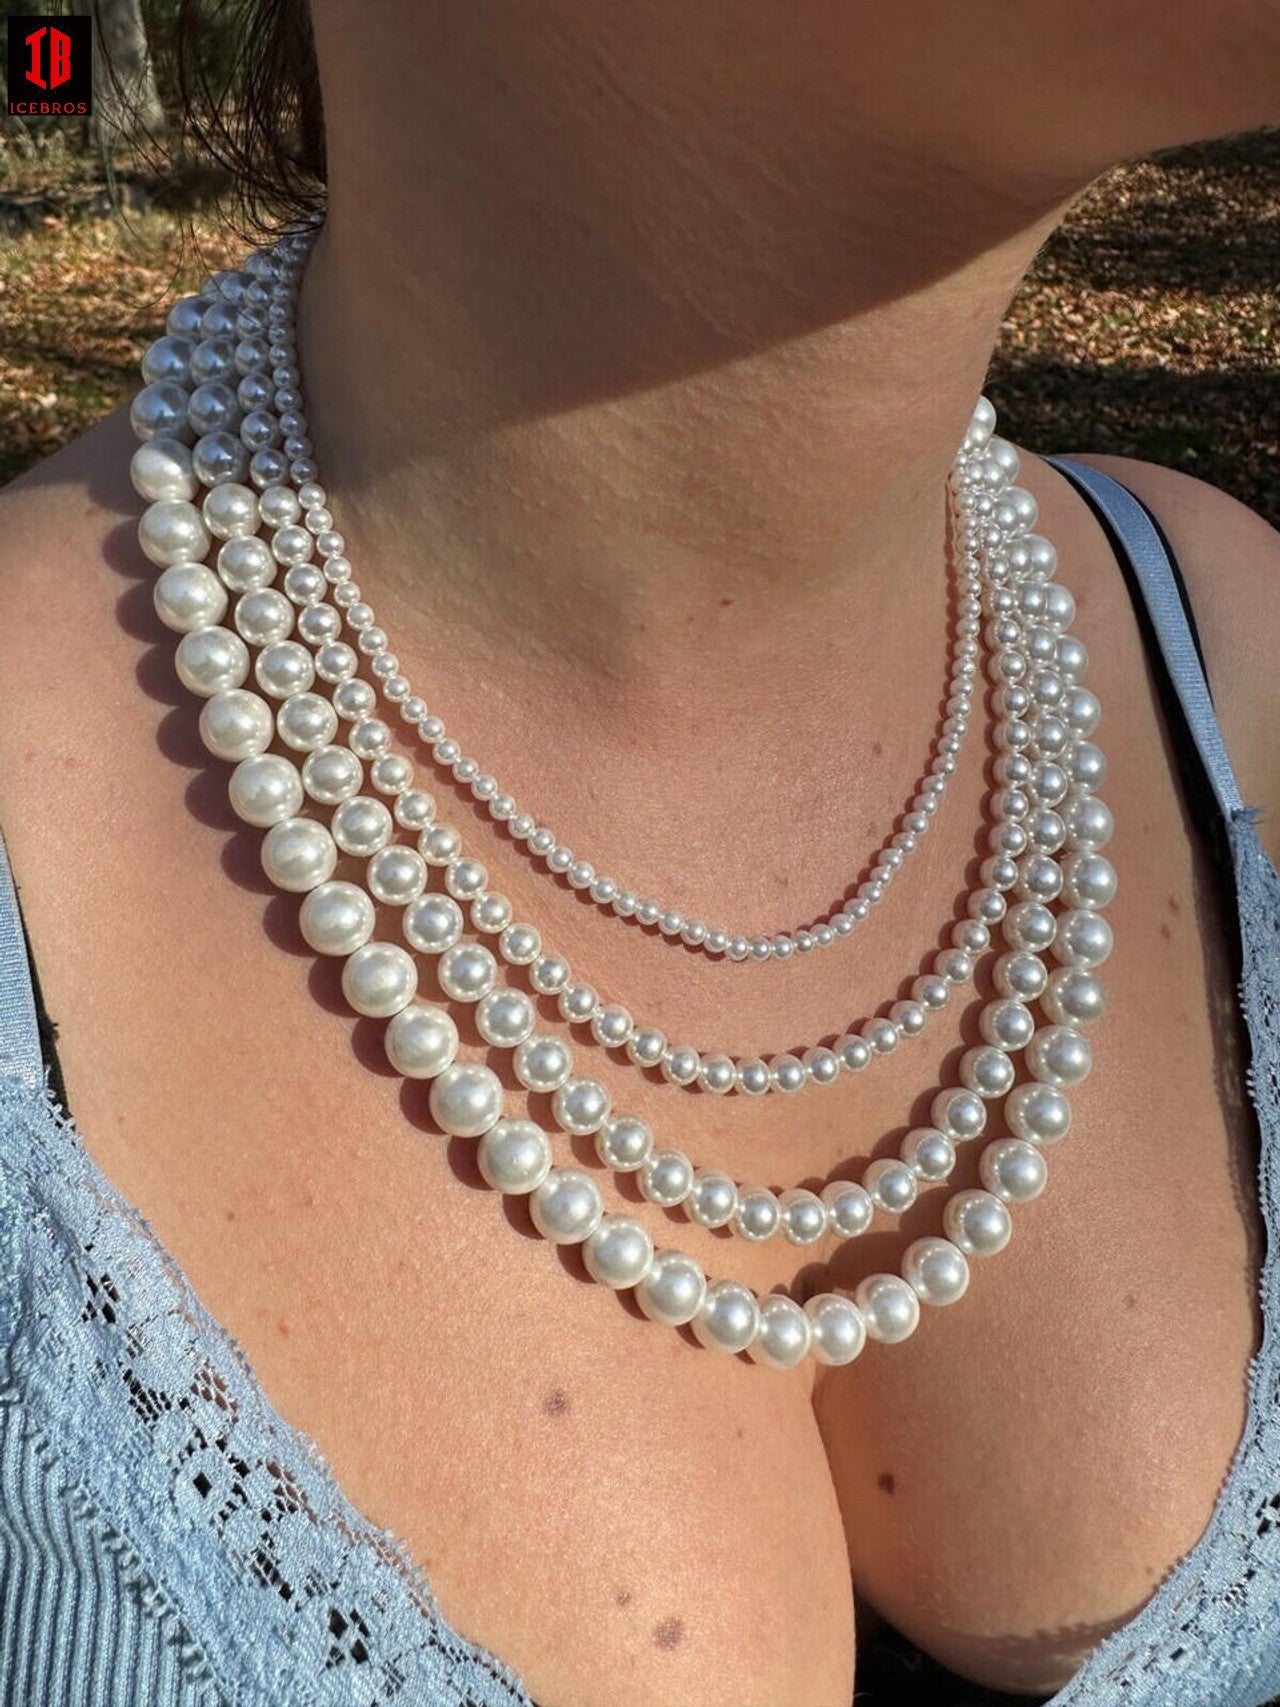 A Women wearing VIntage Pearl chain necklace